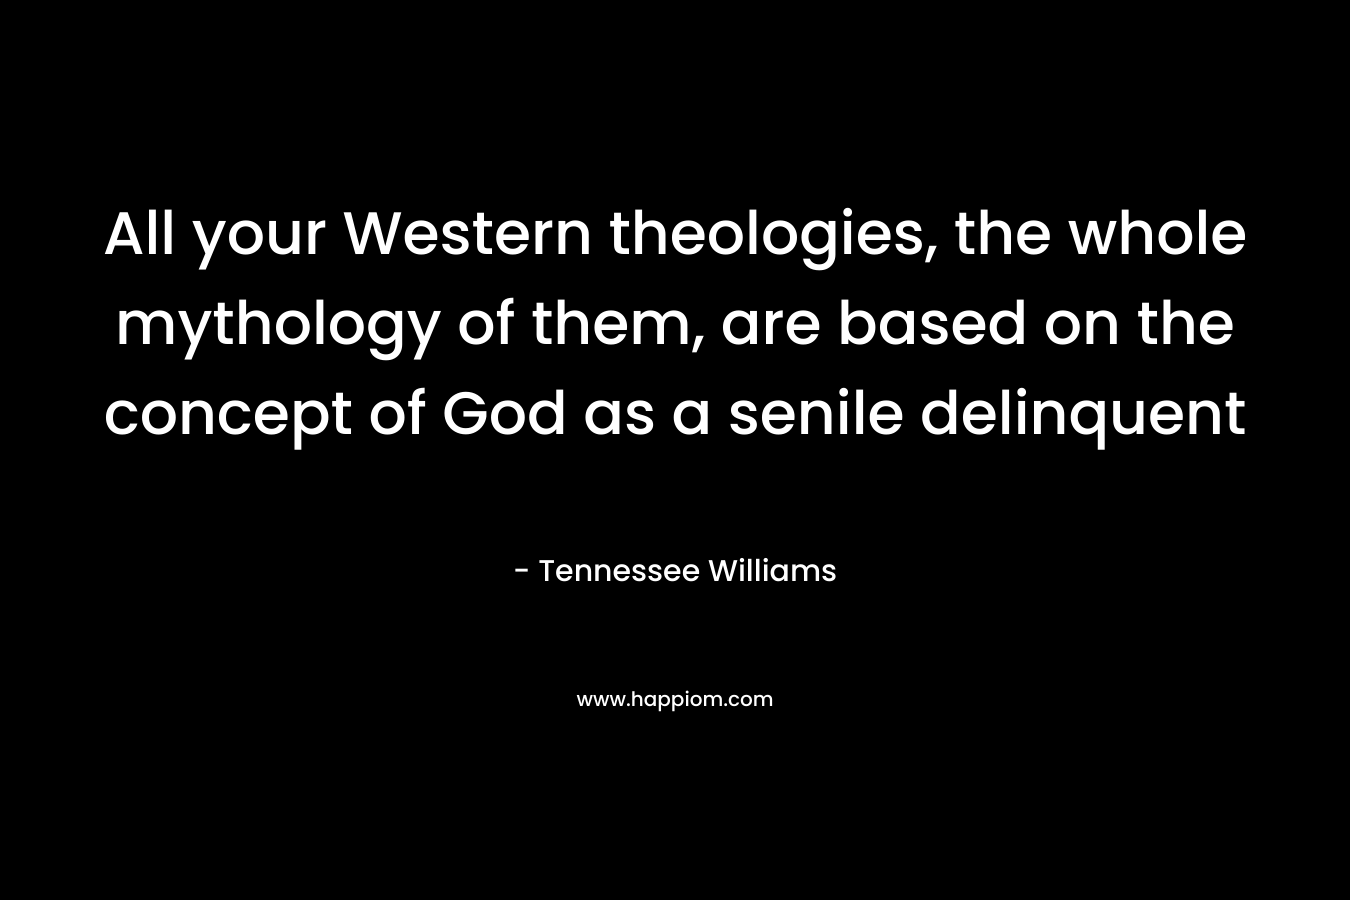 All your Western theologies, the whole mythology of them, are based on the concept of God as a senile delinquent – Tennessee Williams